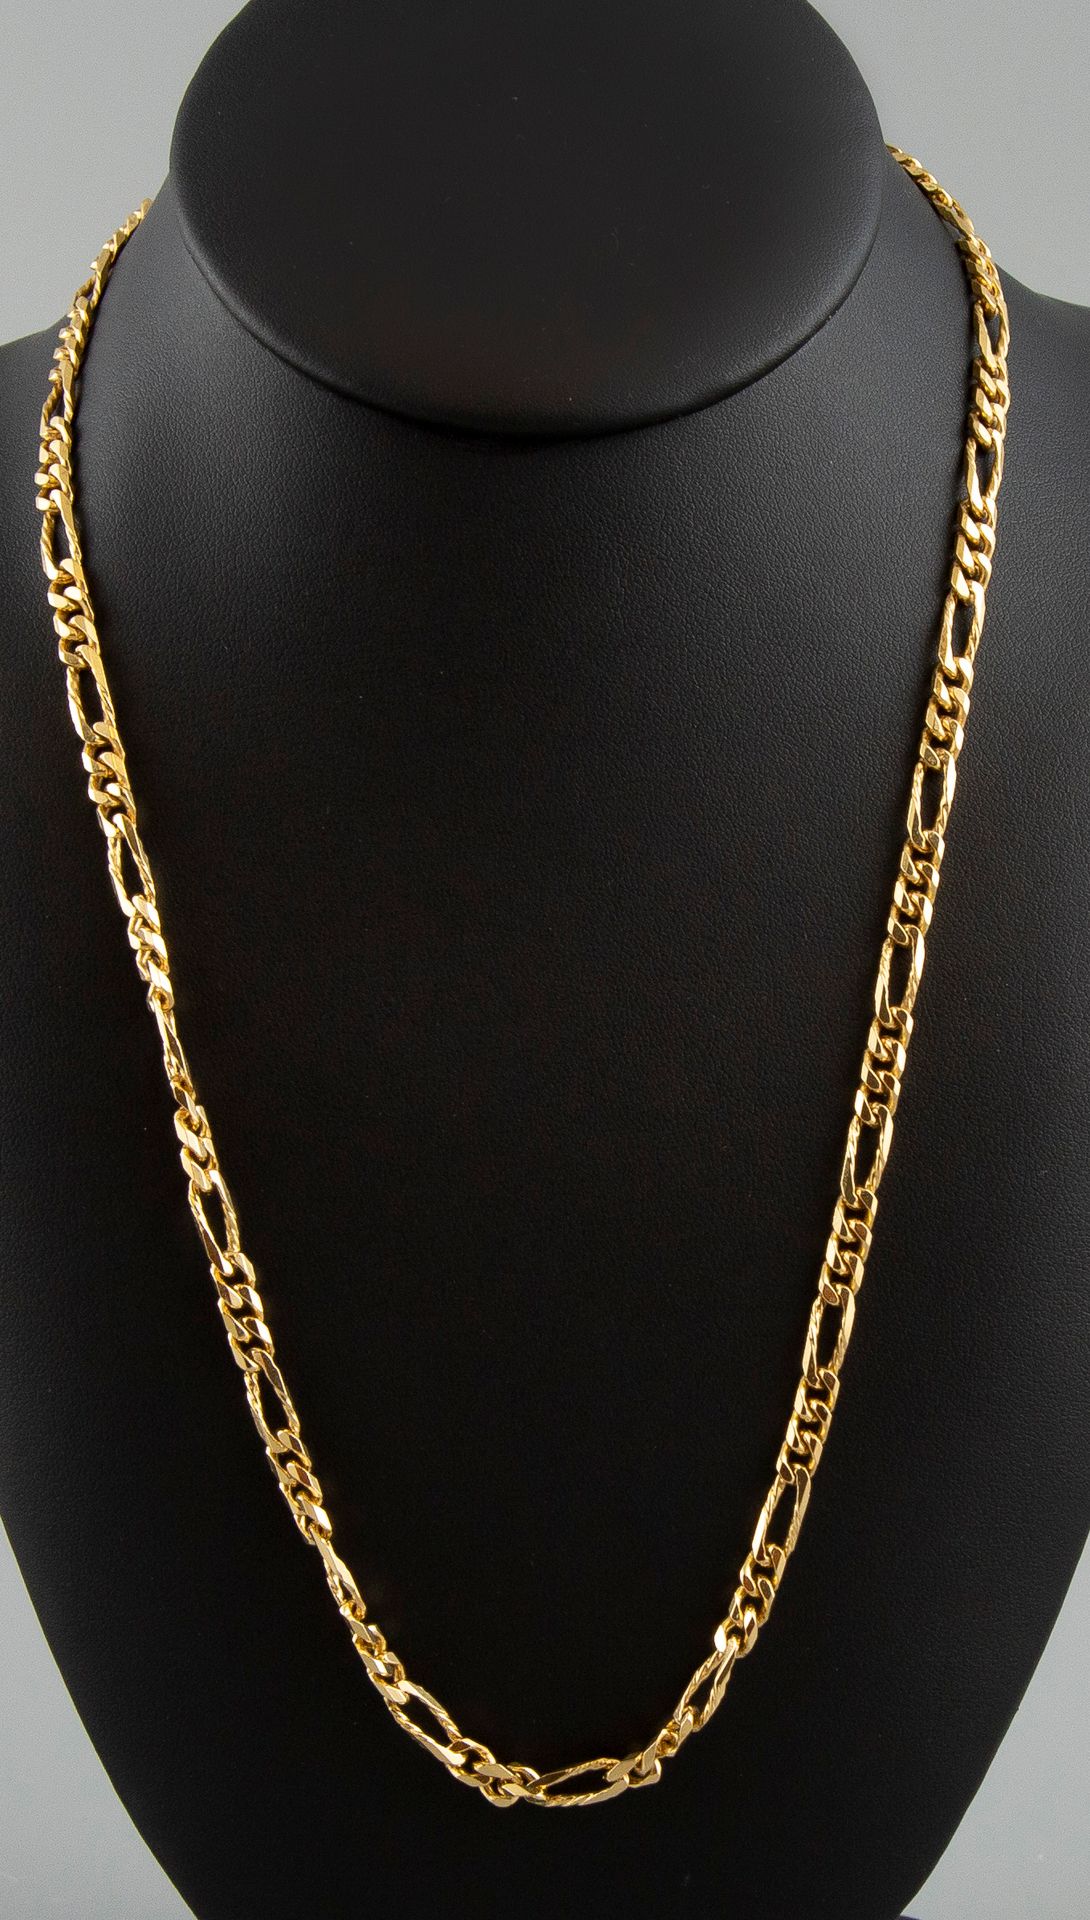 Null Necklace in 18K yellow gold 750°. Weight 36,6g.